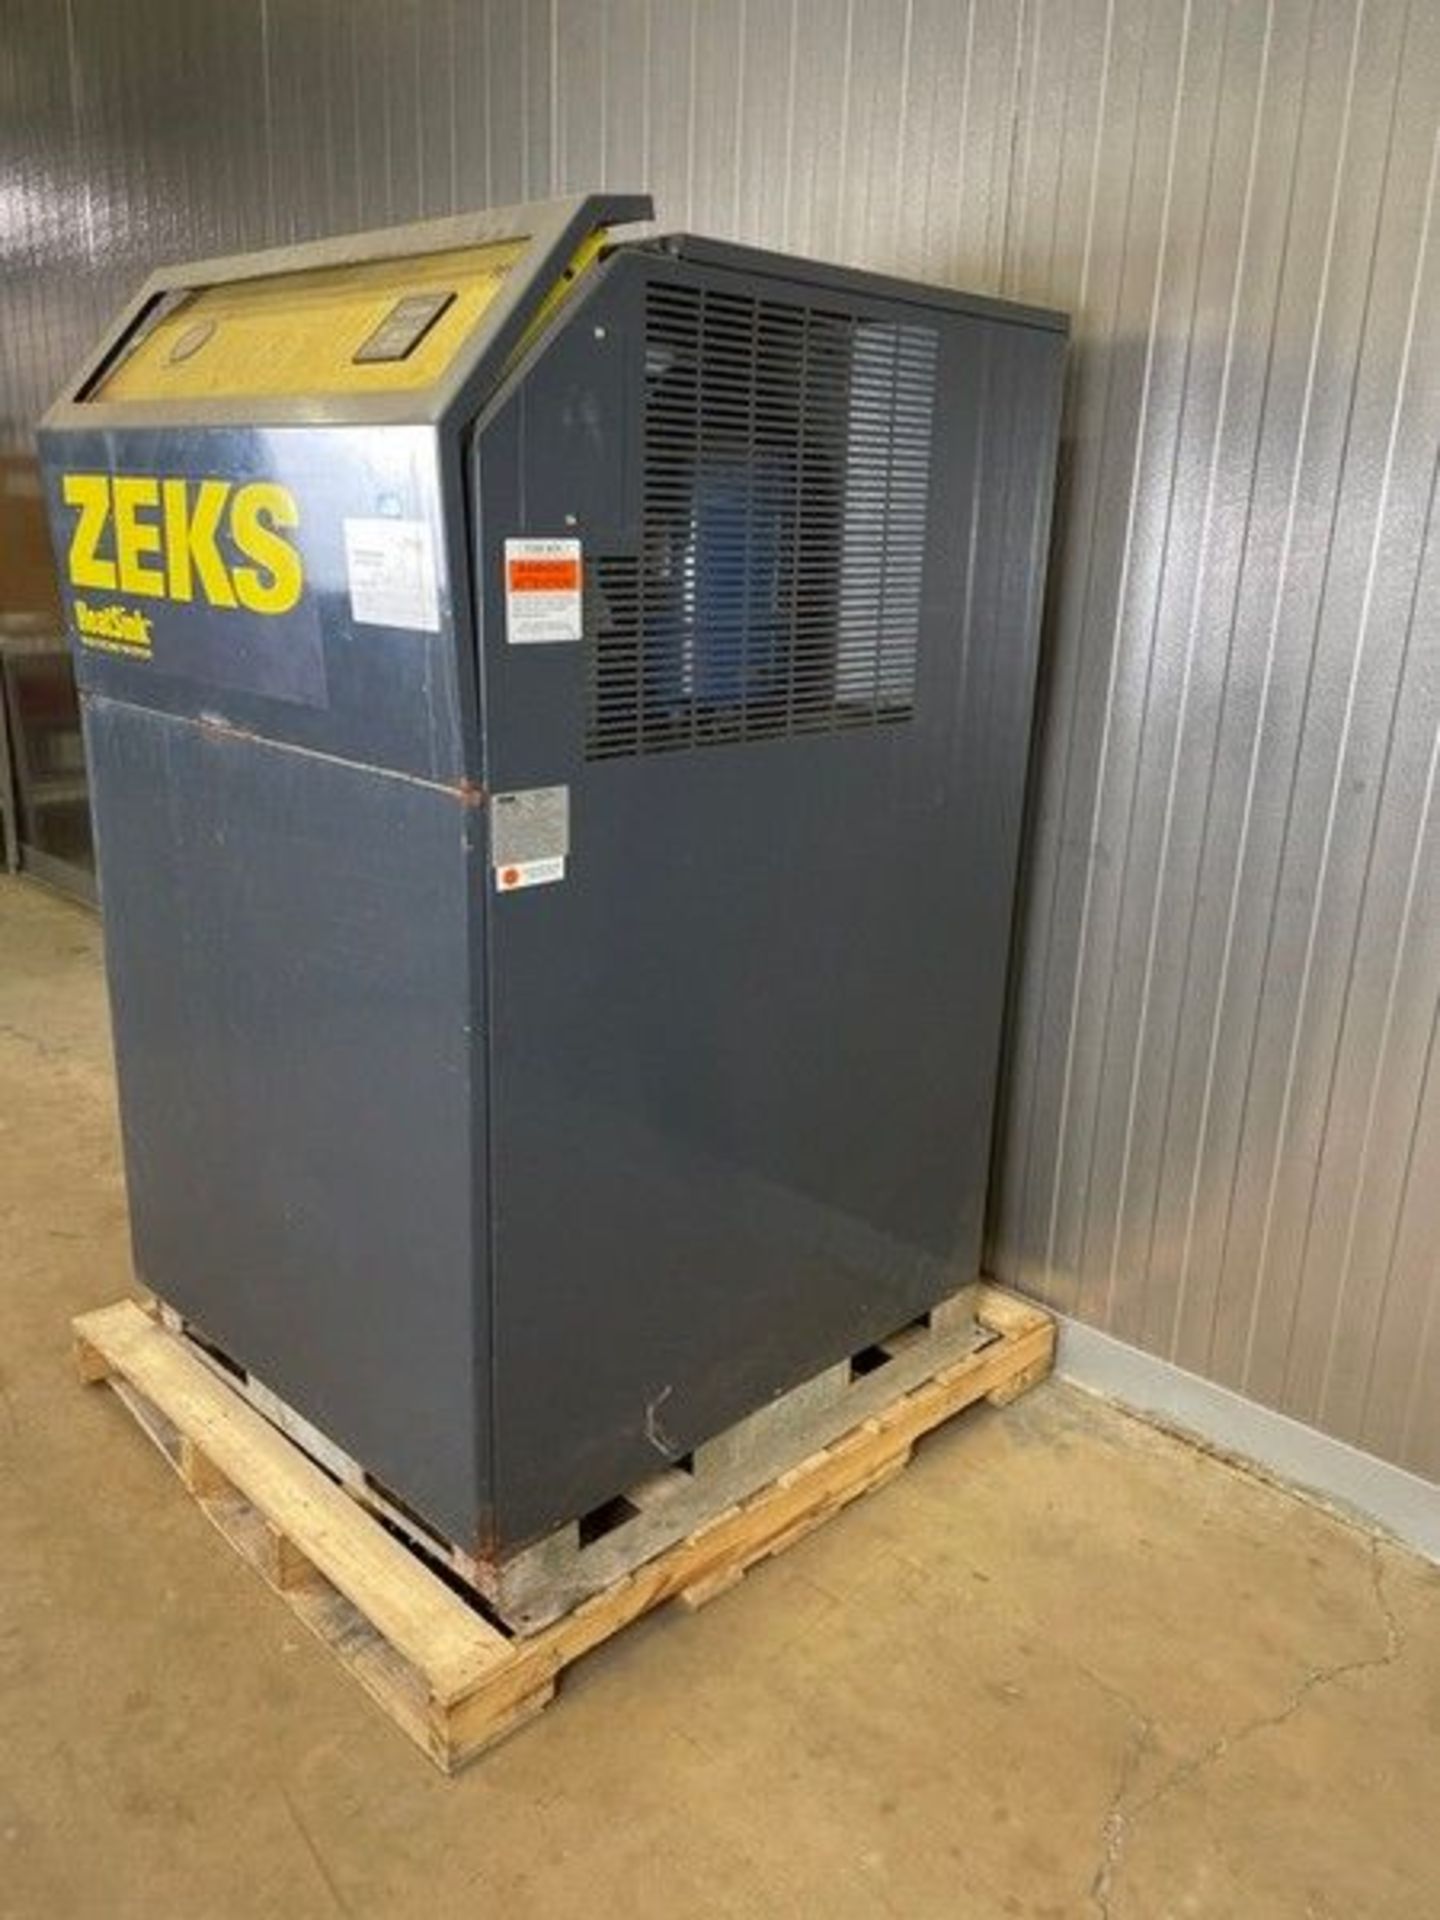 Zeks Air Dryer, M/N 500HSFA400, S/N 248613, R404 Refrigerant, 460 Volts, 3 Phase (Auction ID - Image 2 of 6